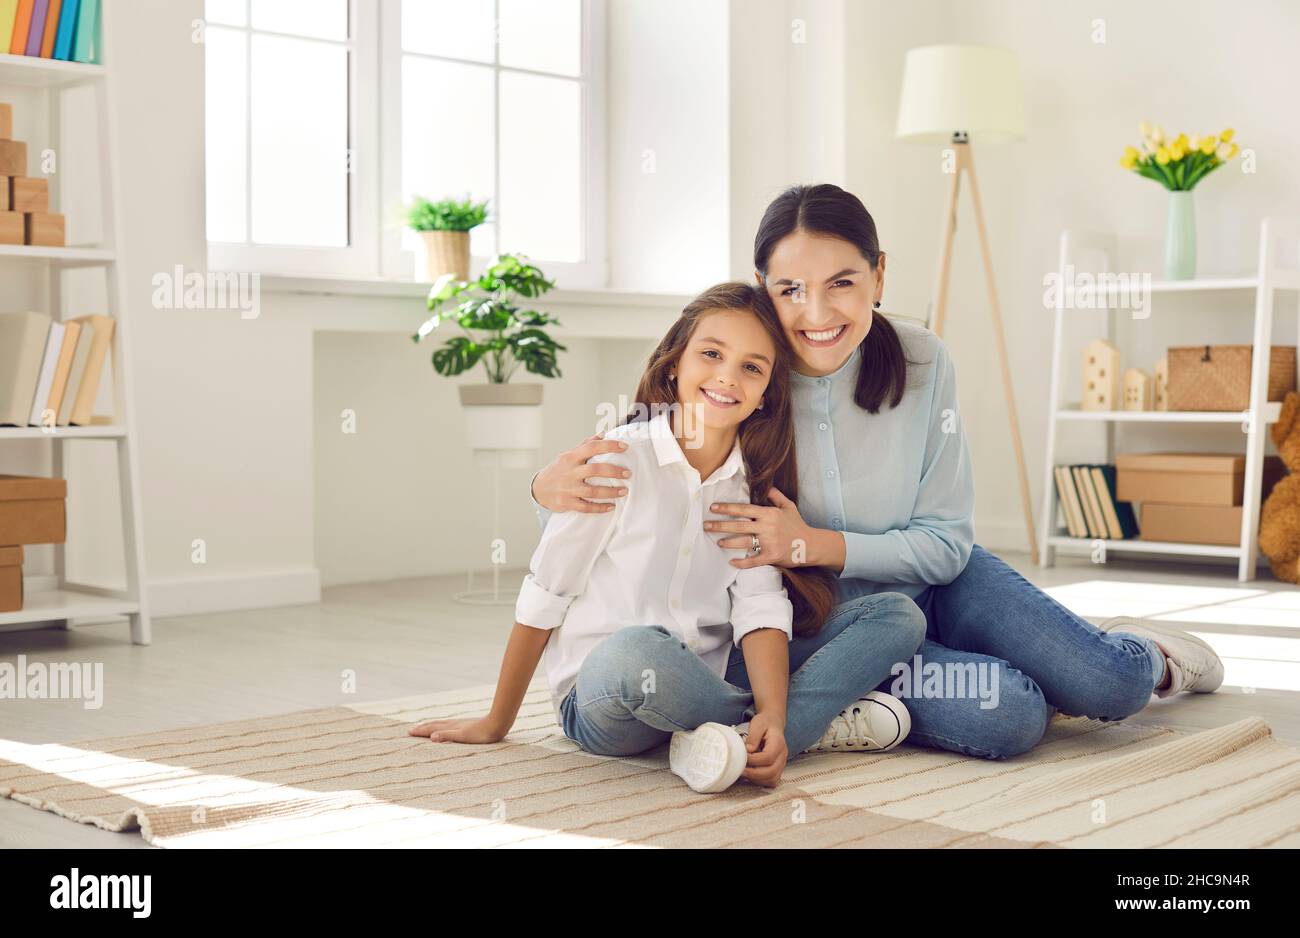 Portrait of smiling mom and daughter relax at home Stock Photo